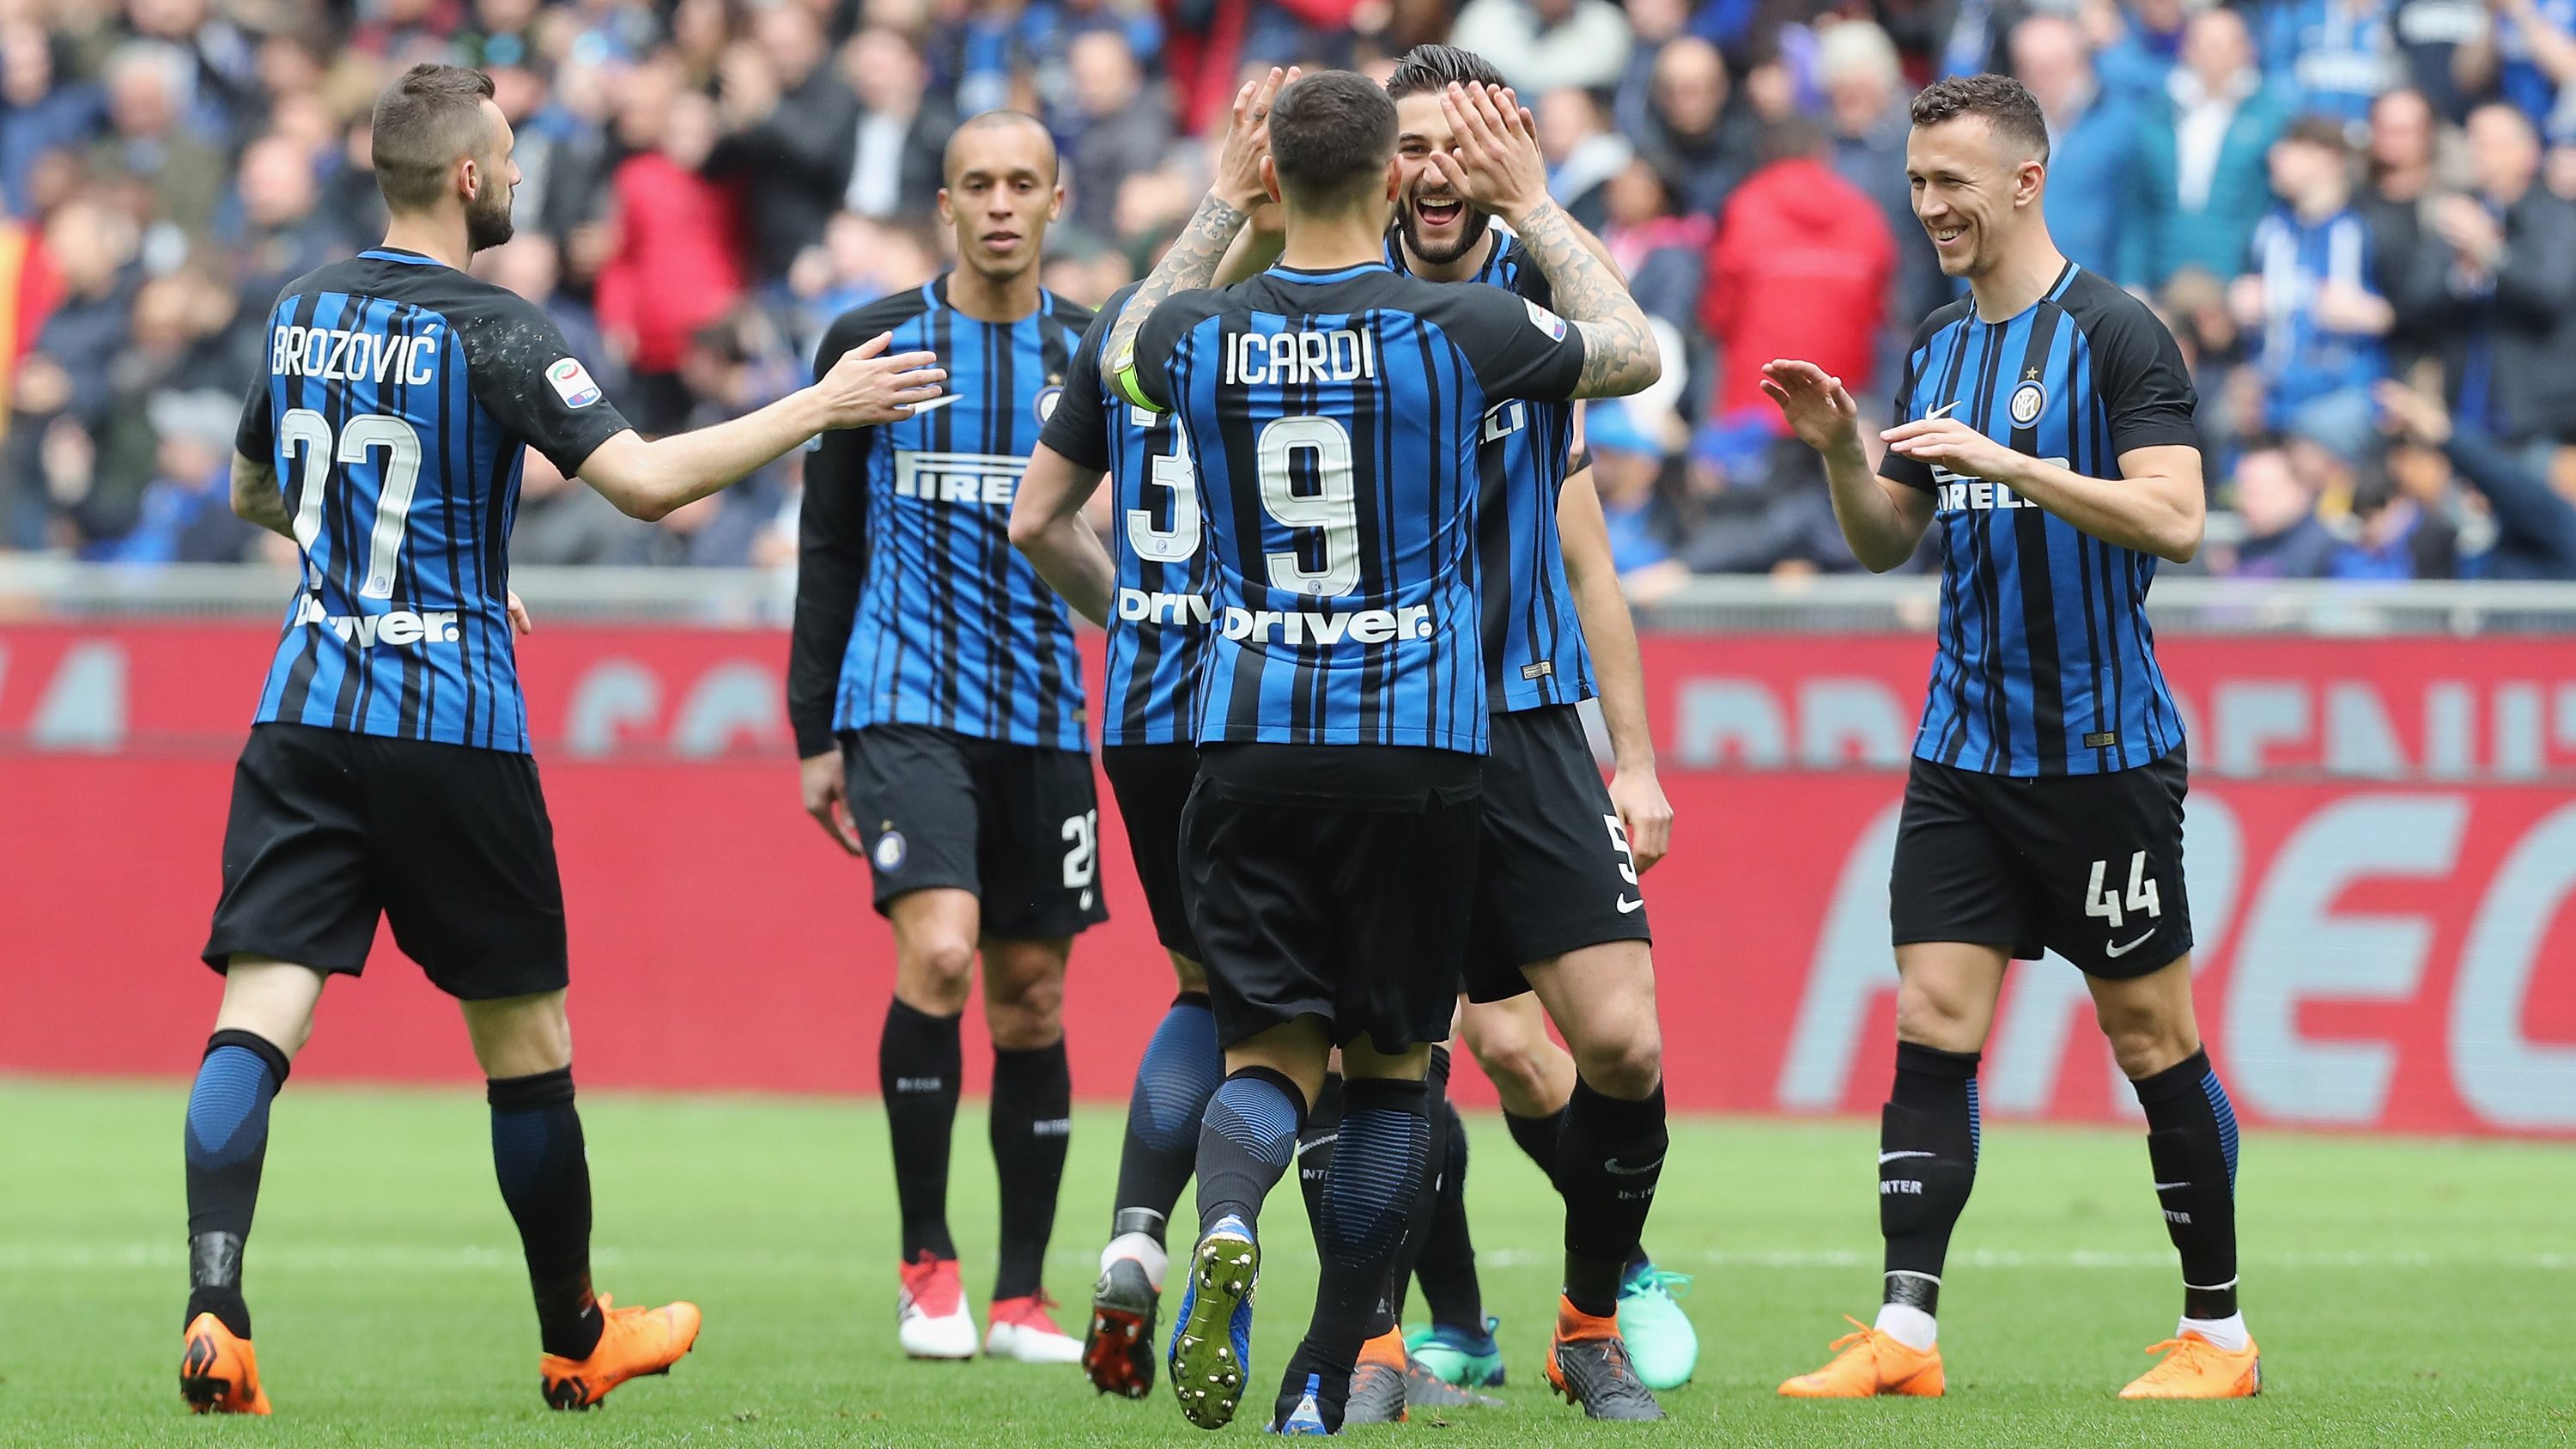 Inter vs AC Milan Live Stream How to Watch Online in USA